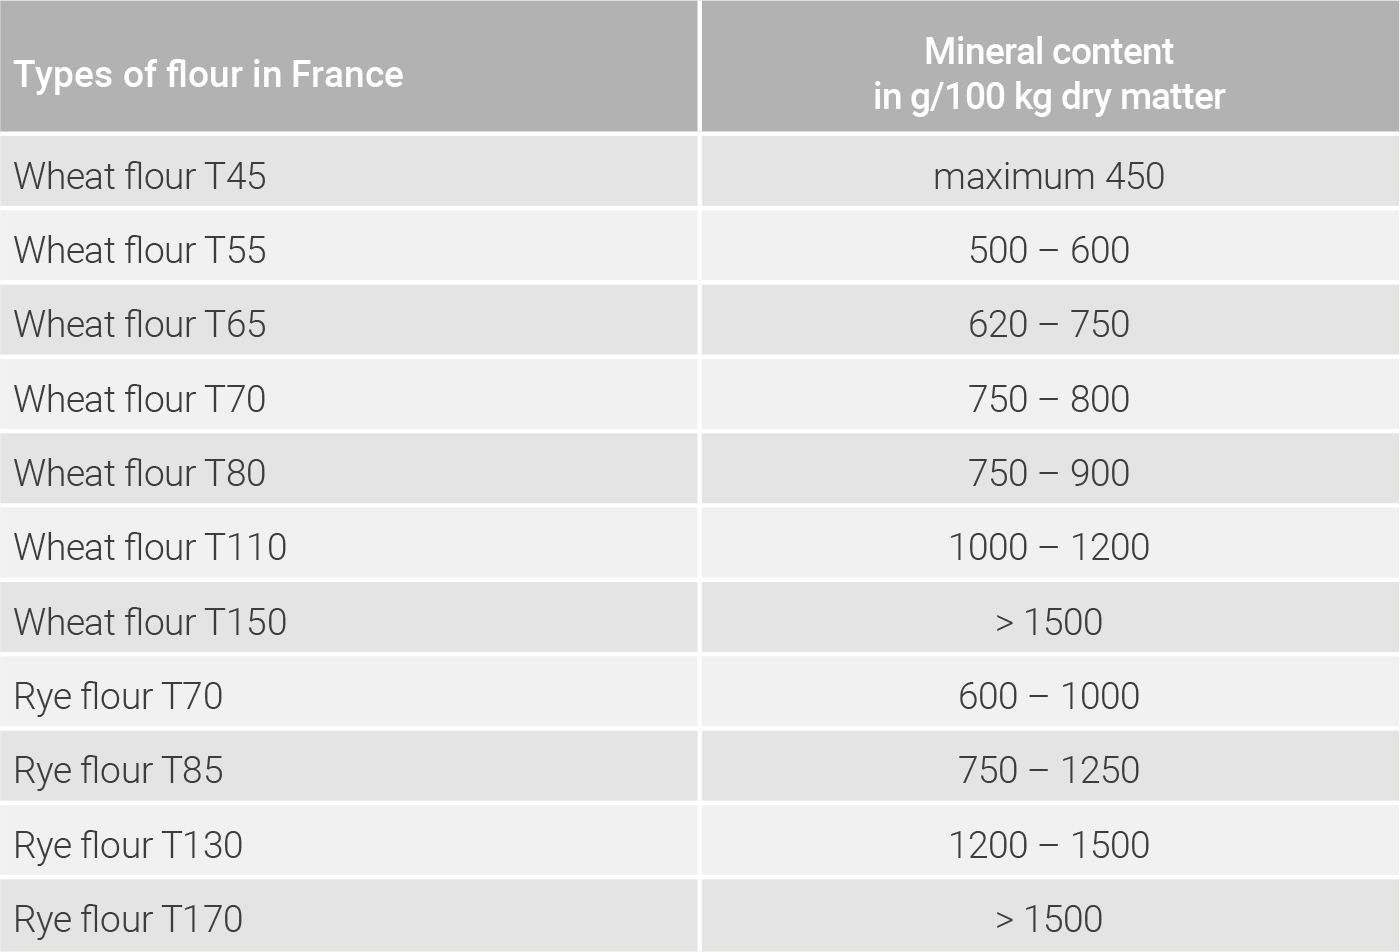 Mineral content of various ground products in France